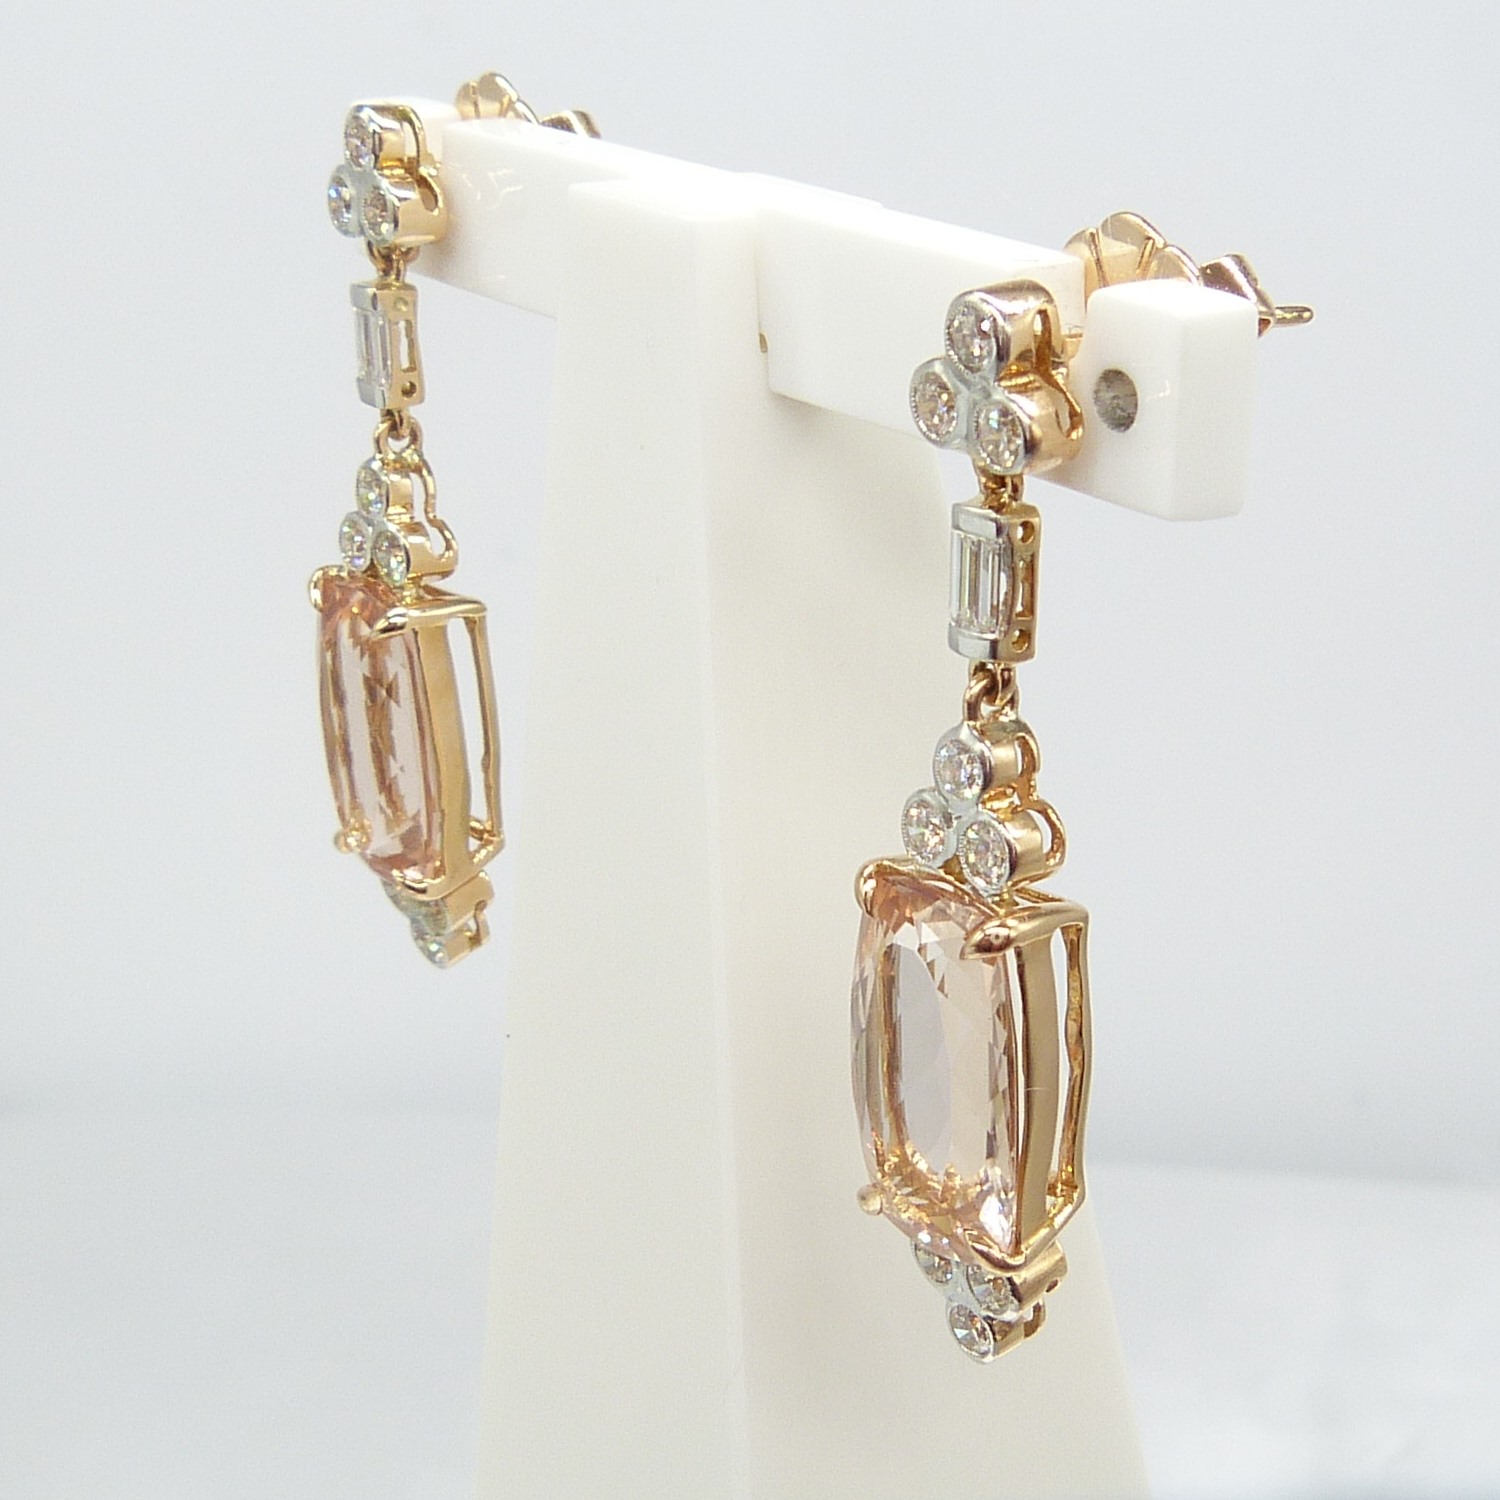 A fine quality pair of checkerboard cushion-cut morganite and diamond drop earrings in rose gold - Image 8 of 12